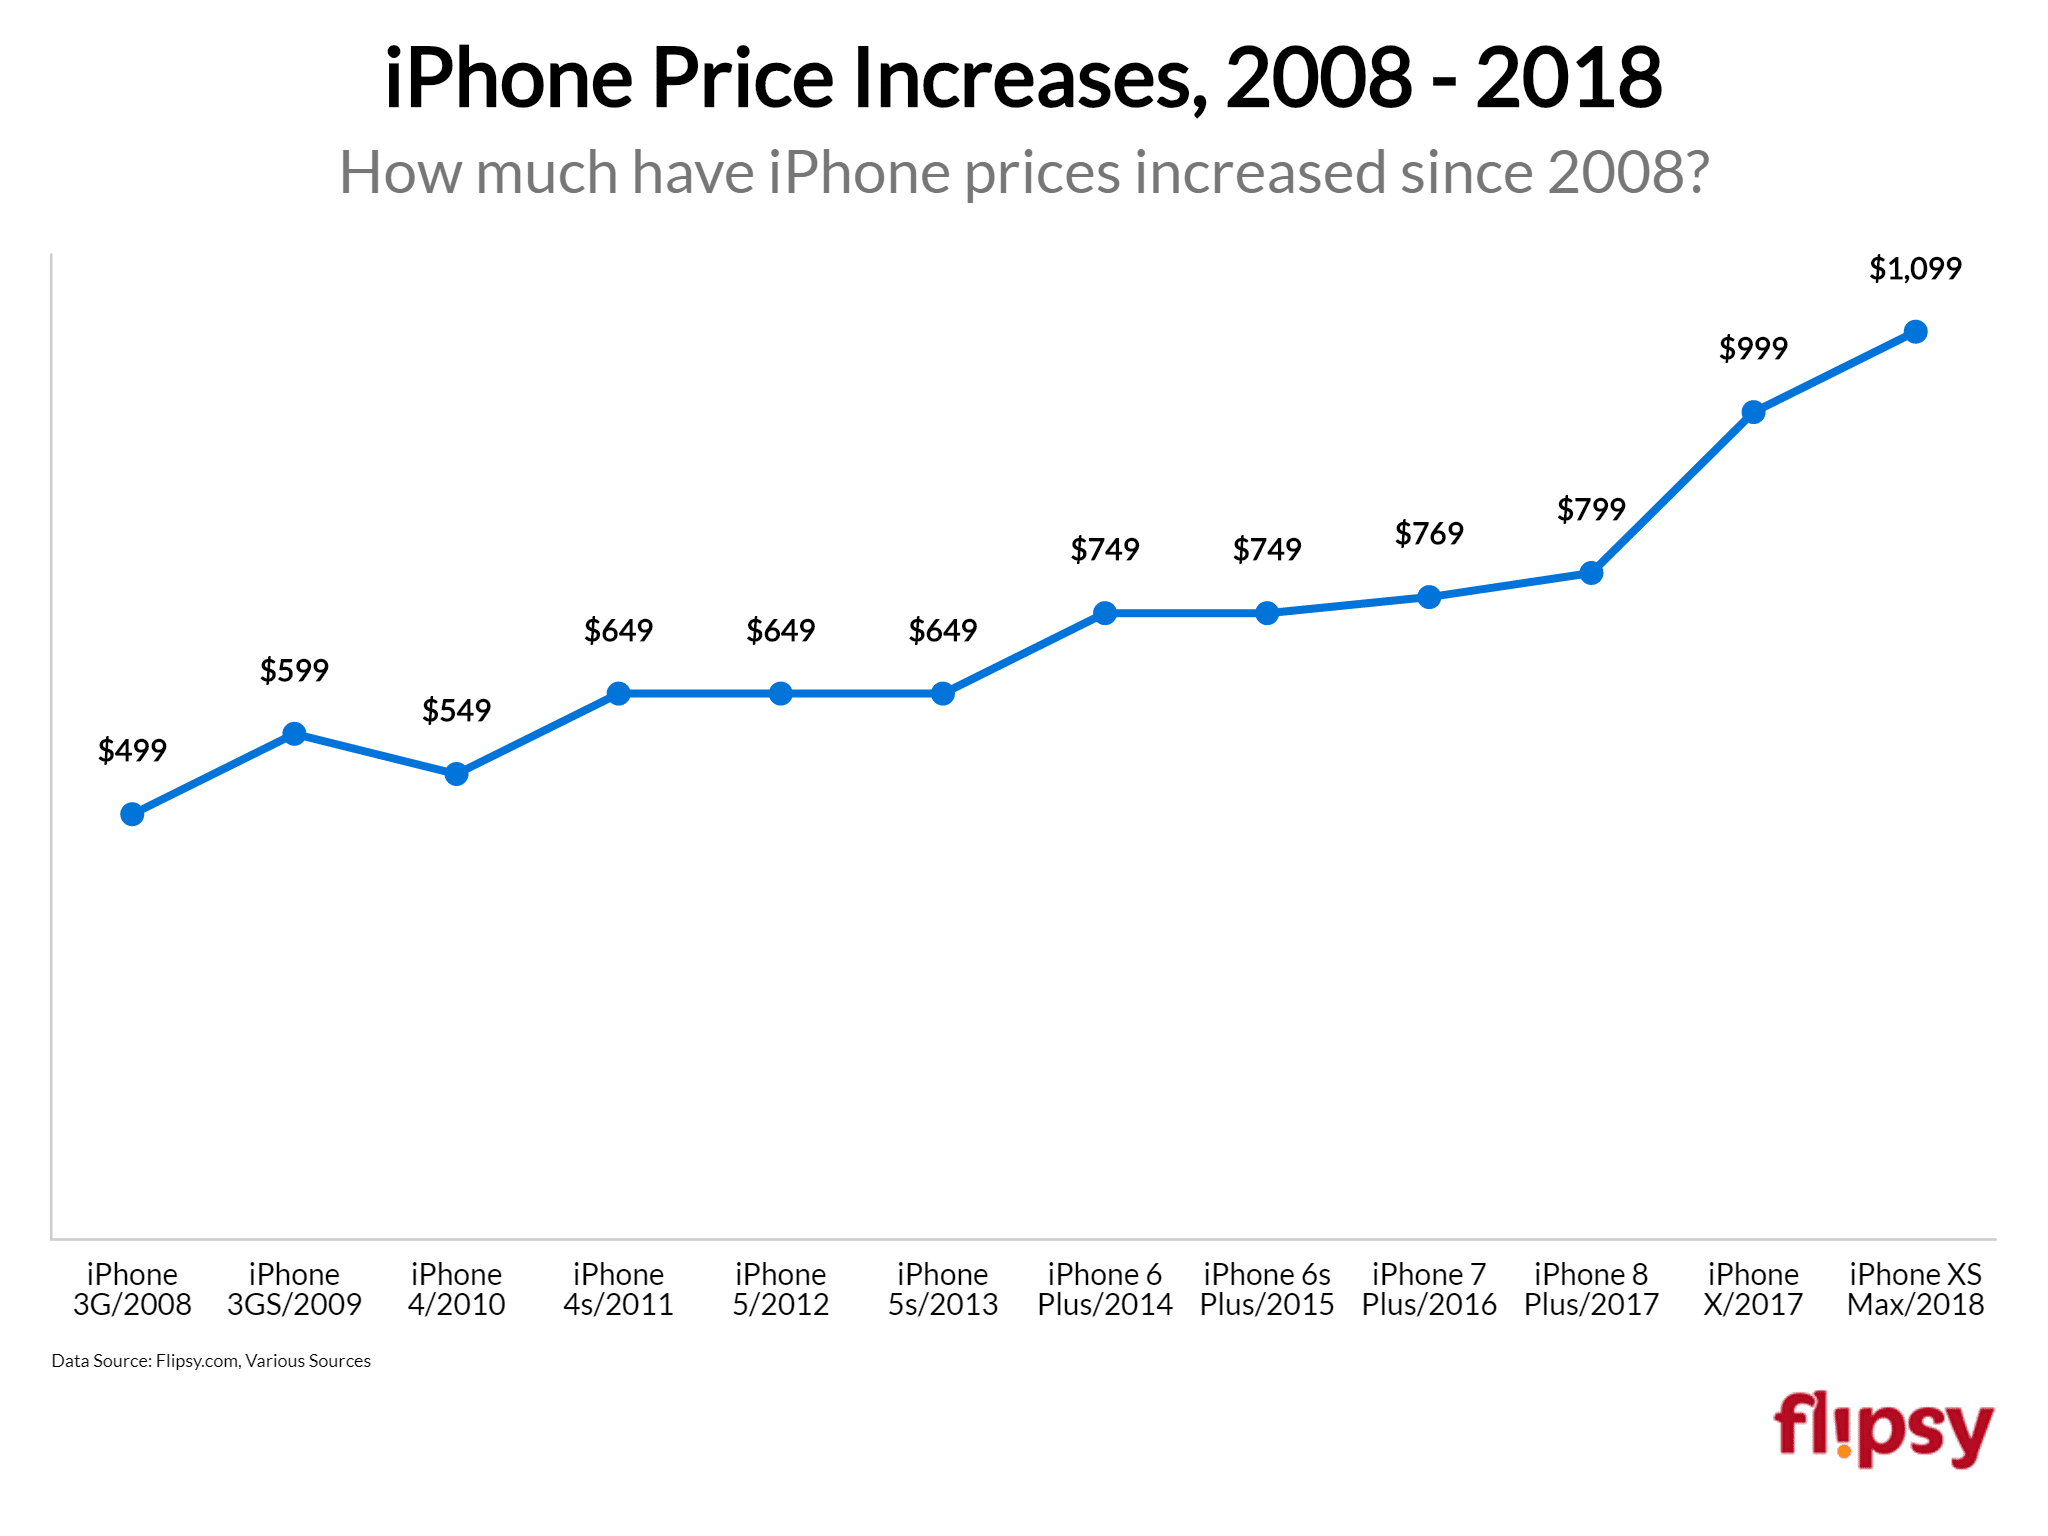 iPhone annual price increases